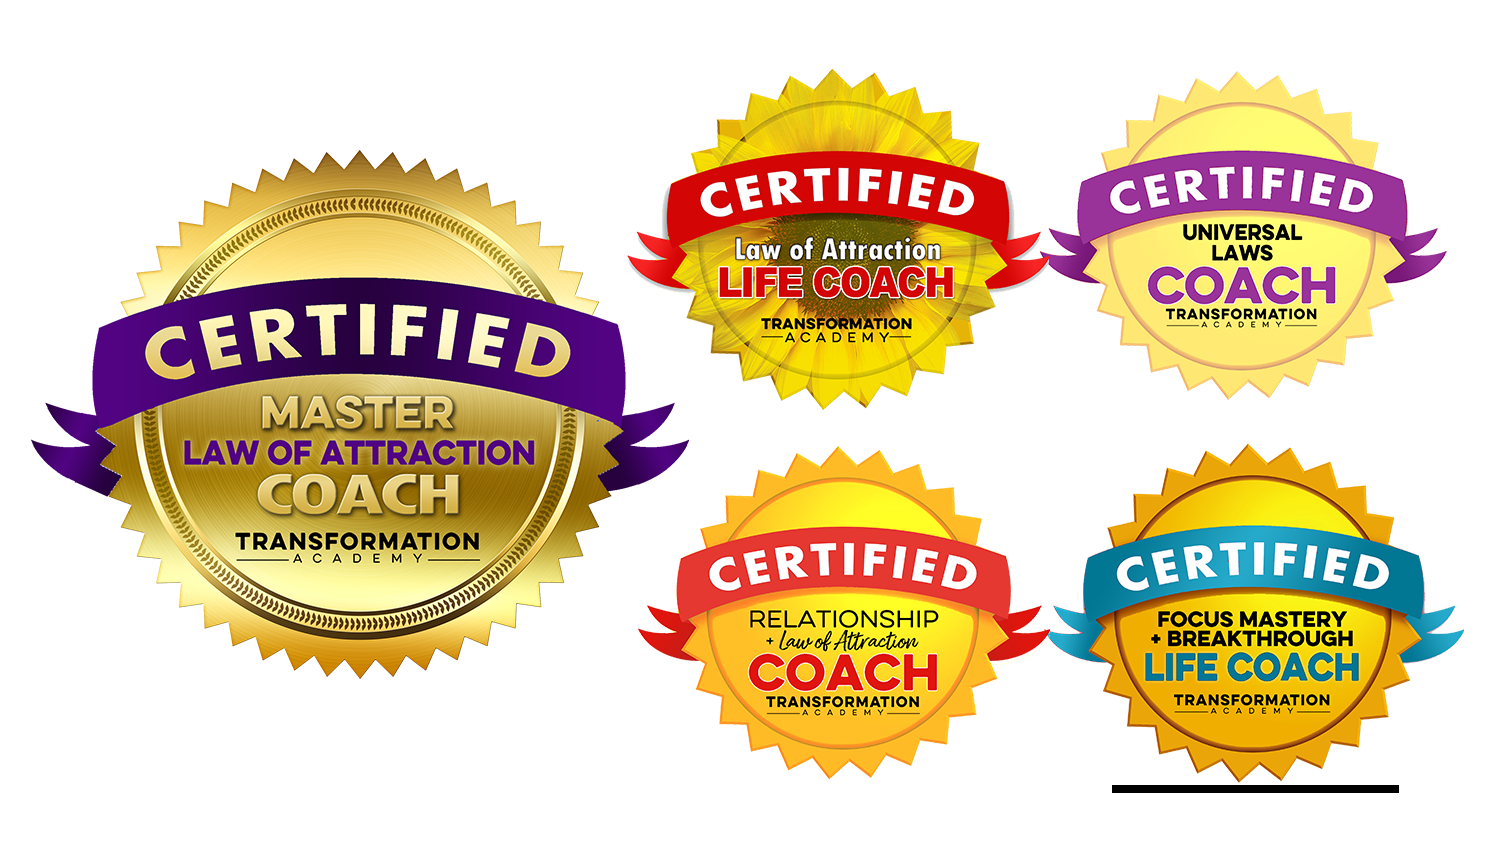 Master Law of Attraction Coach Certification